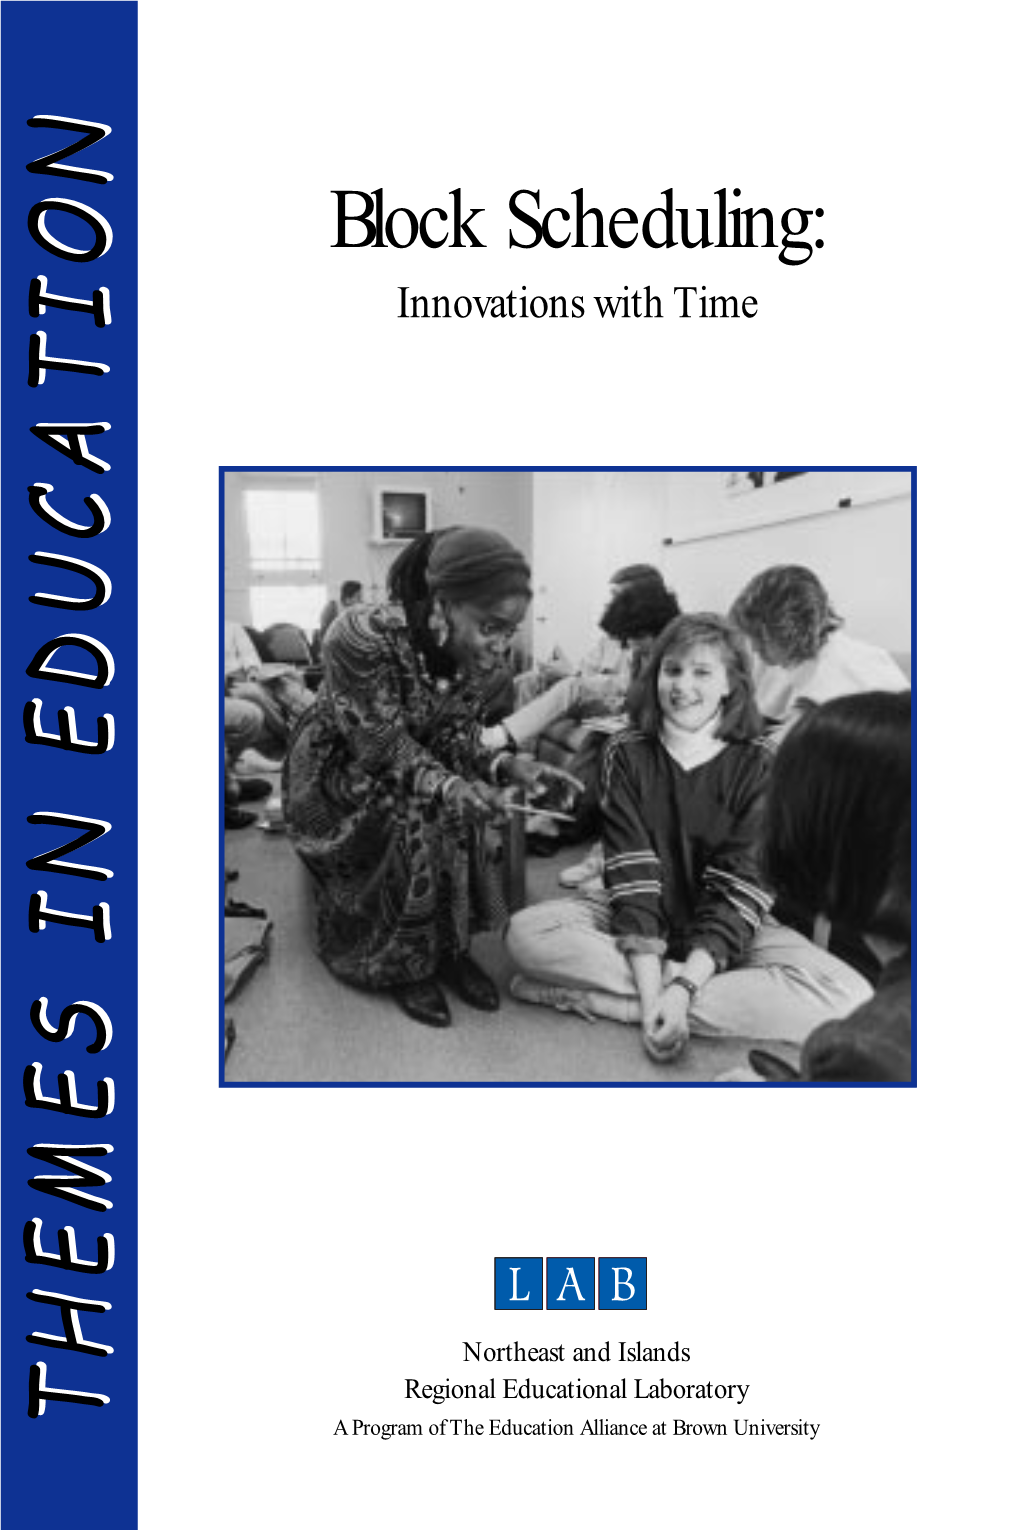 Block Scheduling: Innovations with Time